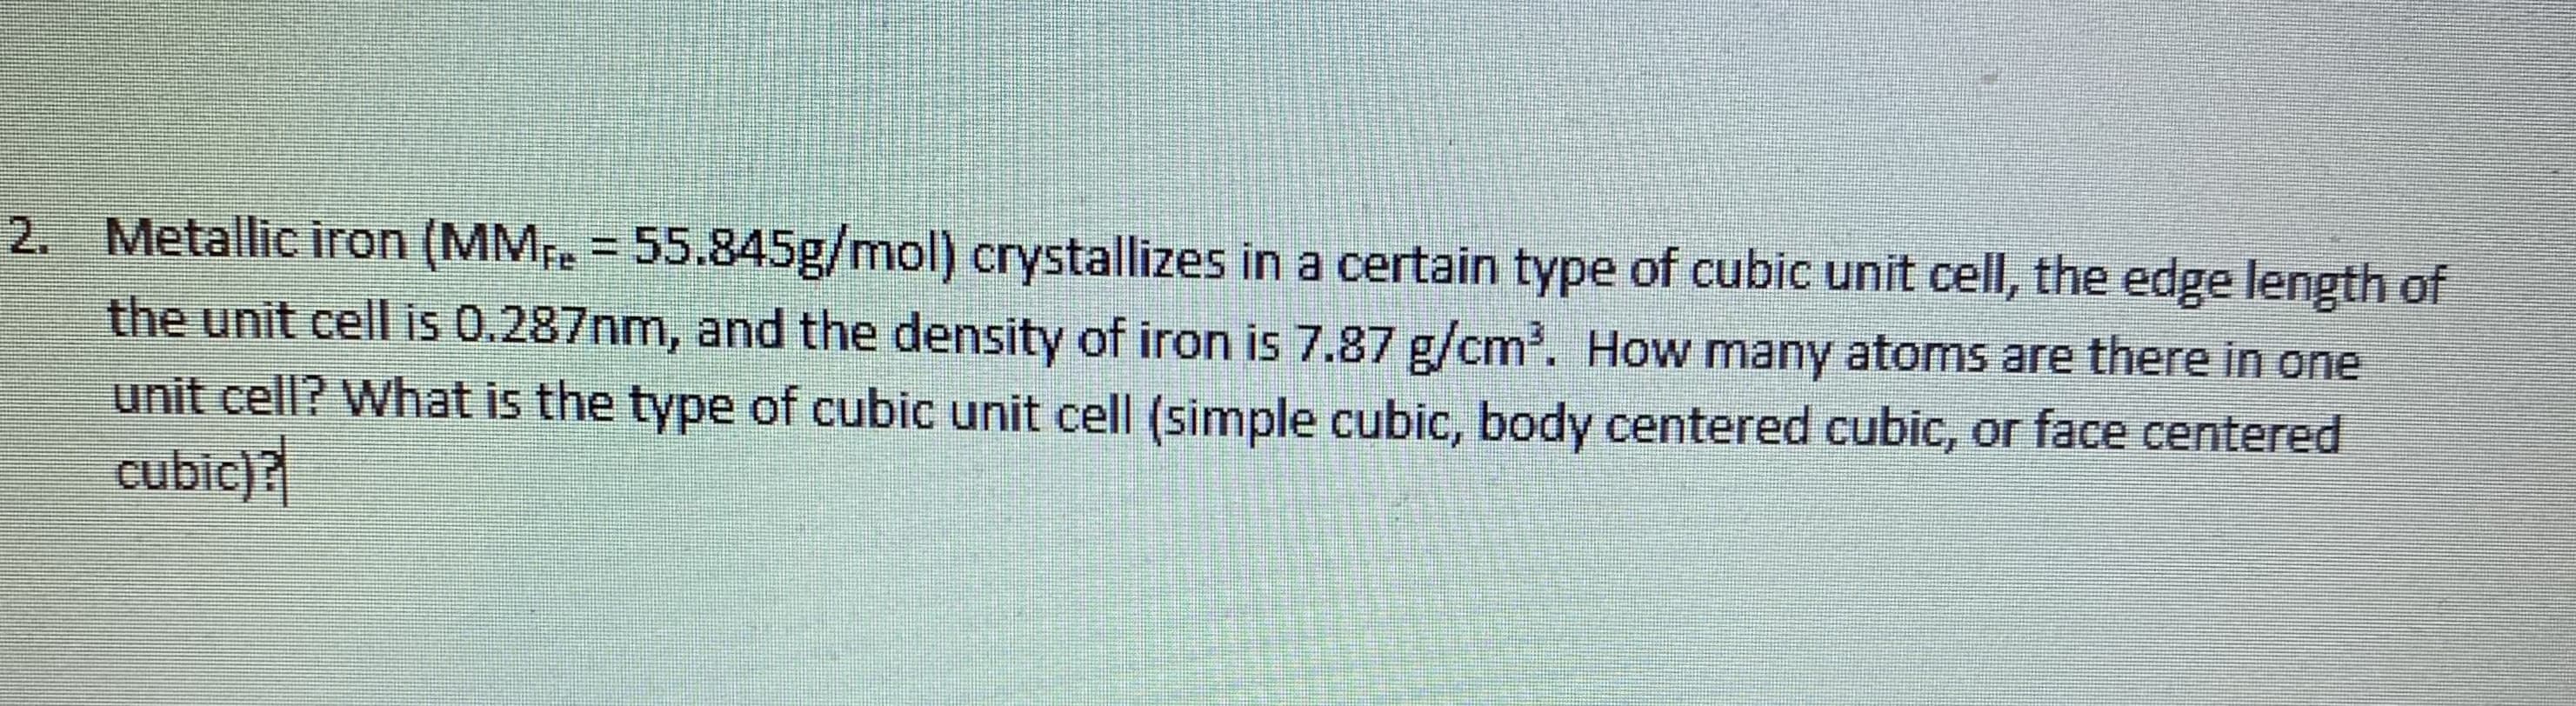 Metallic iron (MMe = 55.845g/mol) crystallizes in a certain type of cubic unit cell, the edge length of
the unit cell is 0.287nm, and the density of iron is 7.87 g/cm. How many atoms are there in one
unit cell? What is the type of cubic unit cell (simple cubic, body centered cubic, or face centered
cubic)?
